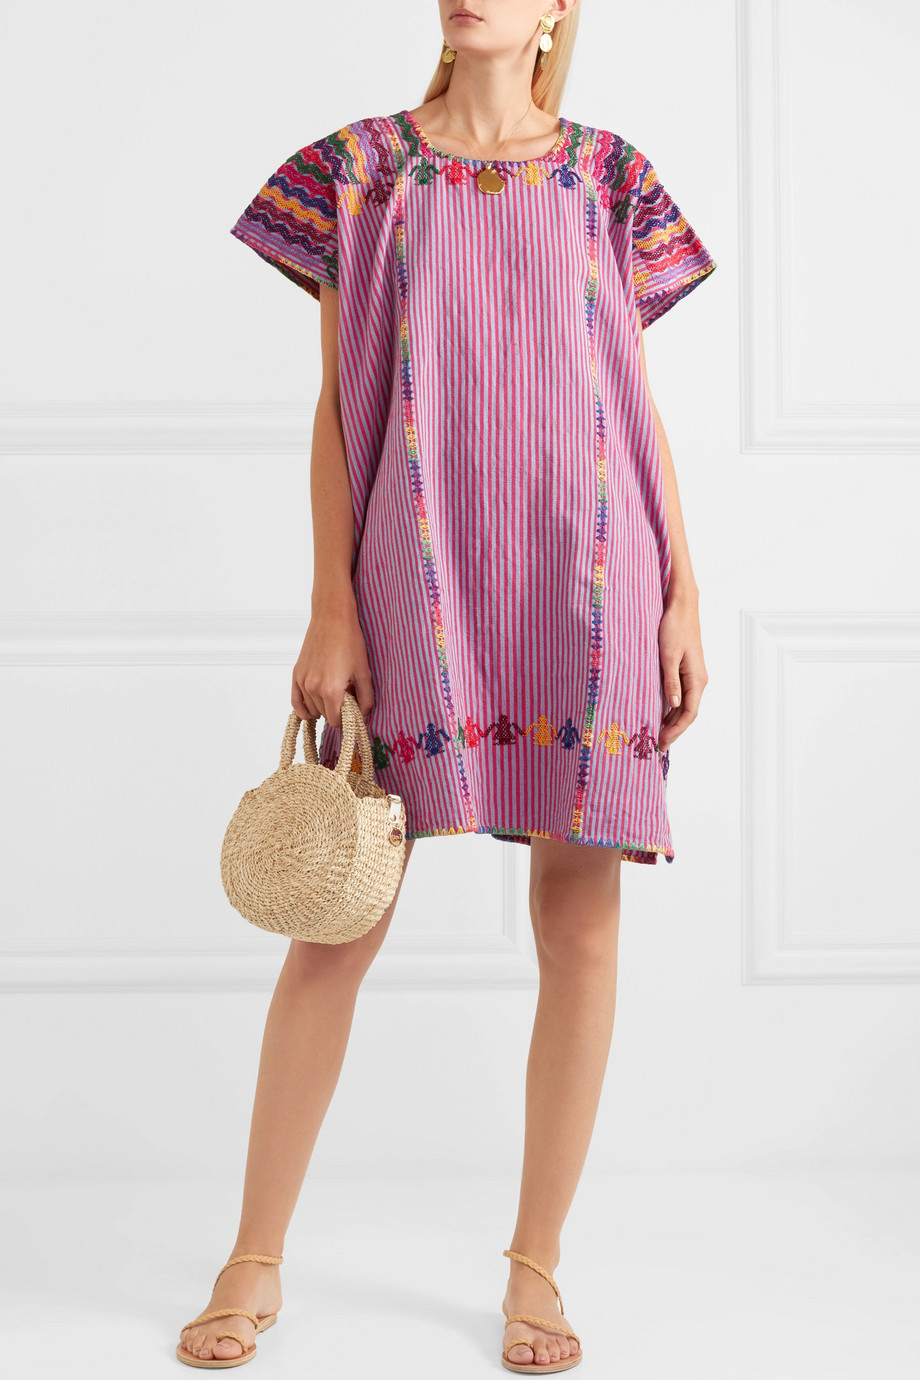 Pippa Holt Embroidered Stripe Cotton Caftan Mexican Dress